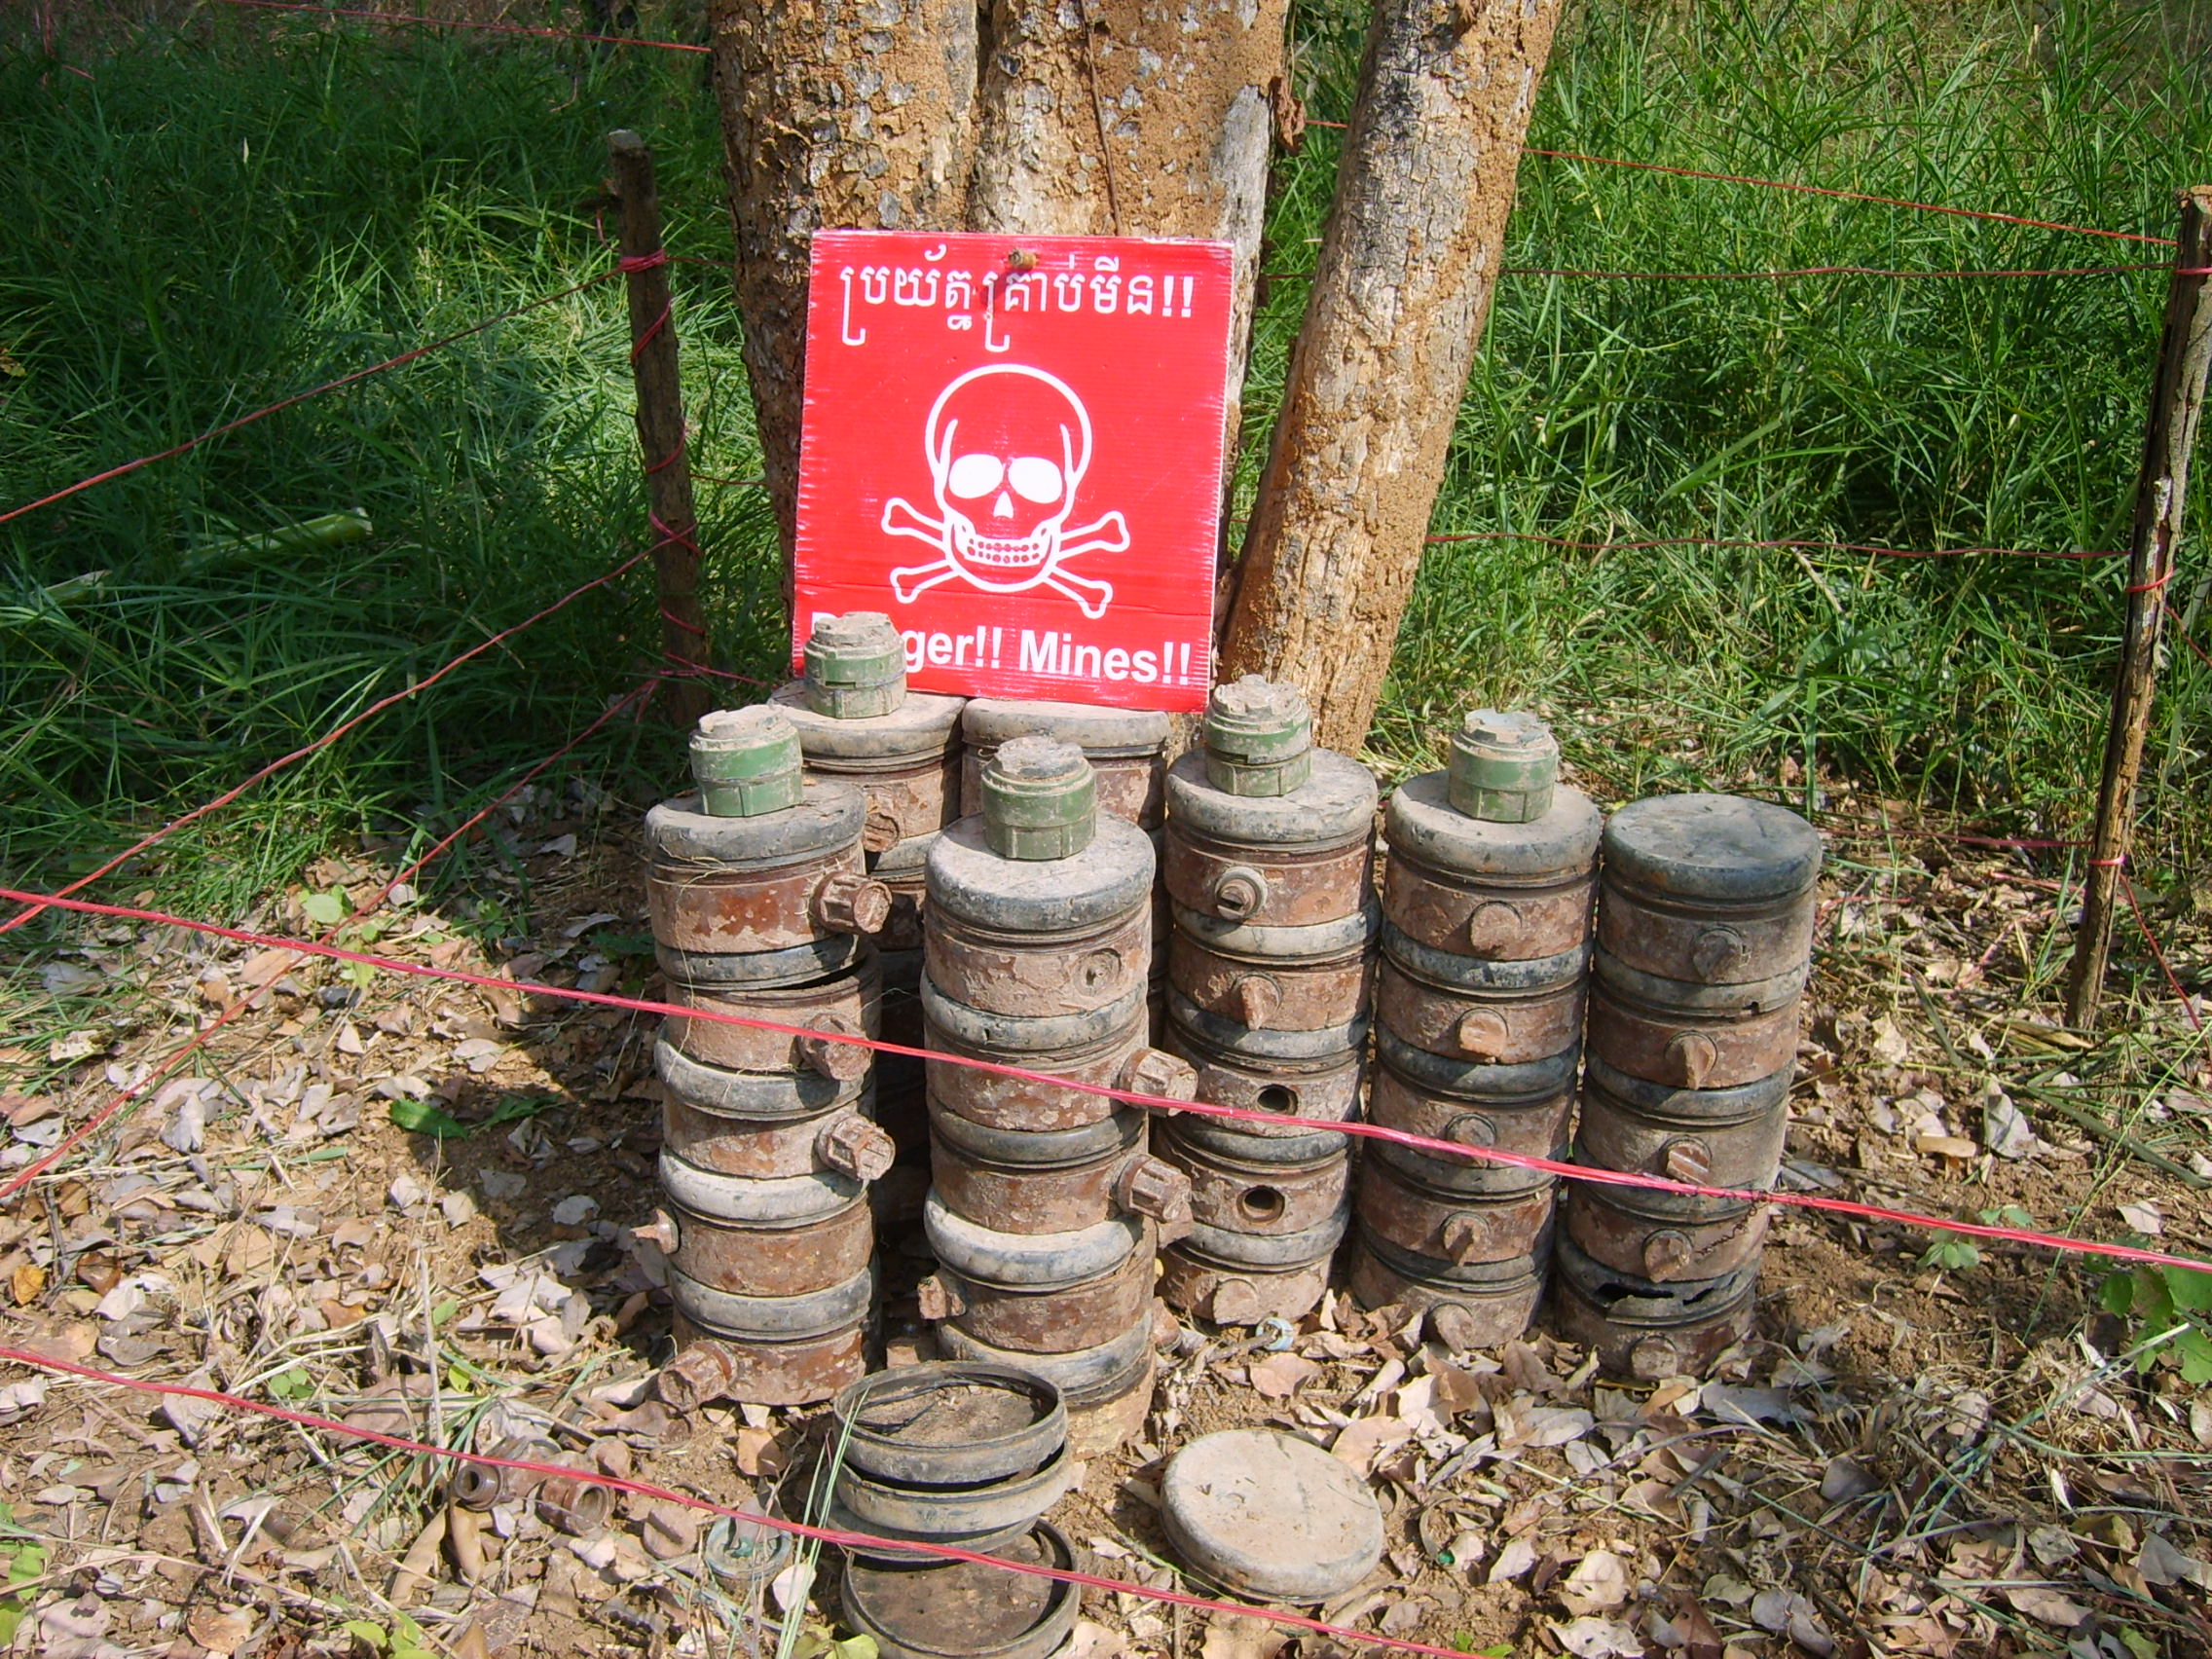 Several stacks of landmines that Cambodian Self-Help Demining (CSHD) has located and unearthed to be disarmed. TCU alum Bill Morse '71 works with CSHD and helps advance the organization's mission to find and disarm landmines and unexploded ordnance (UXOs) in parts of Cambodia deemed 